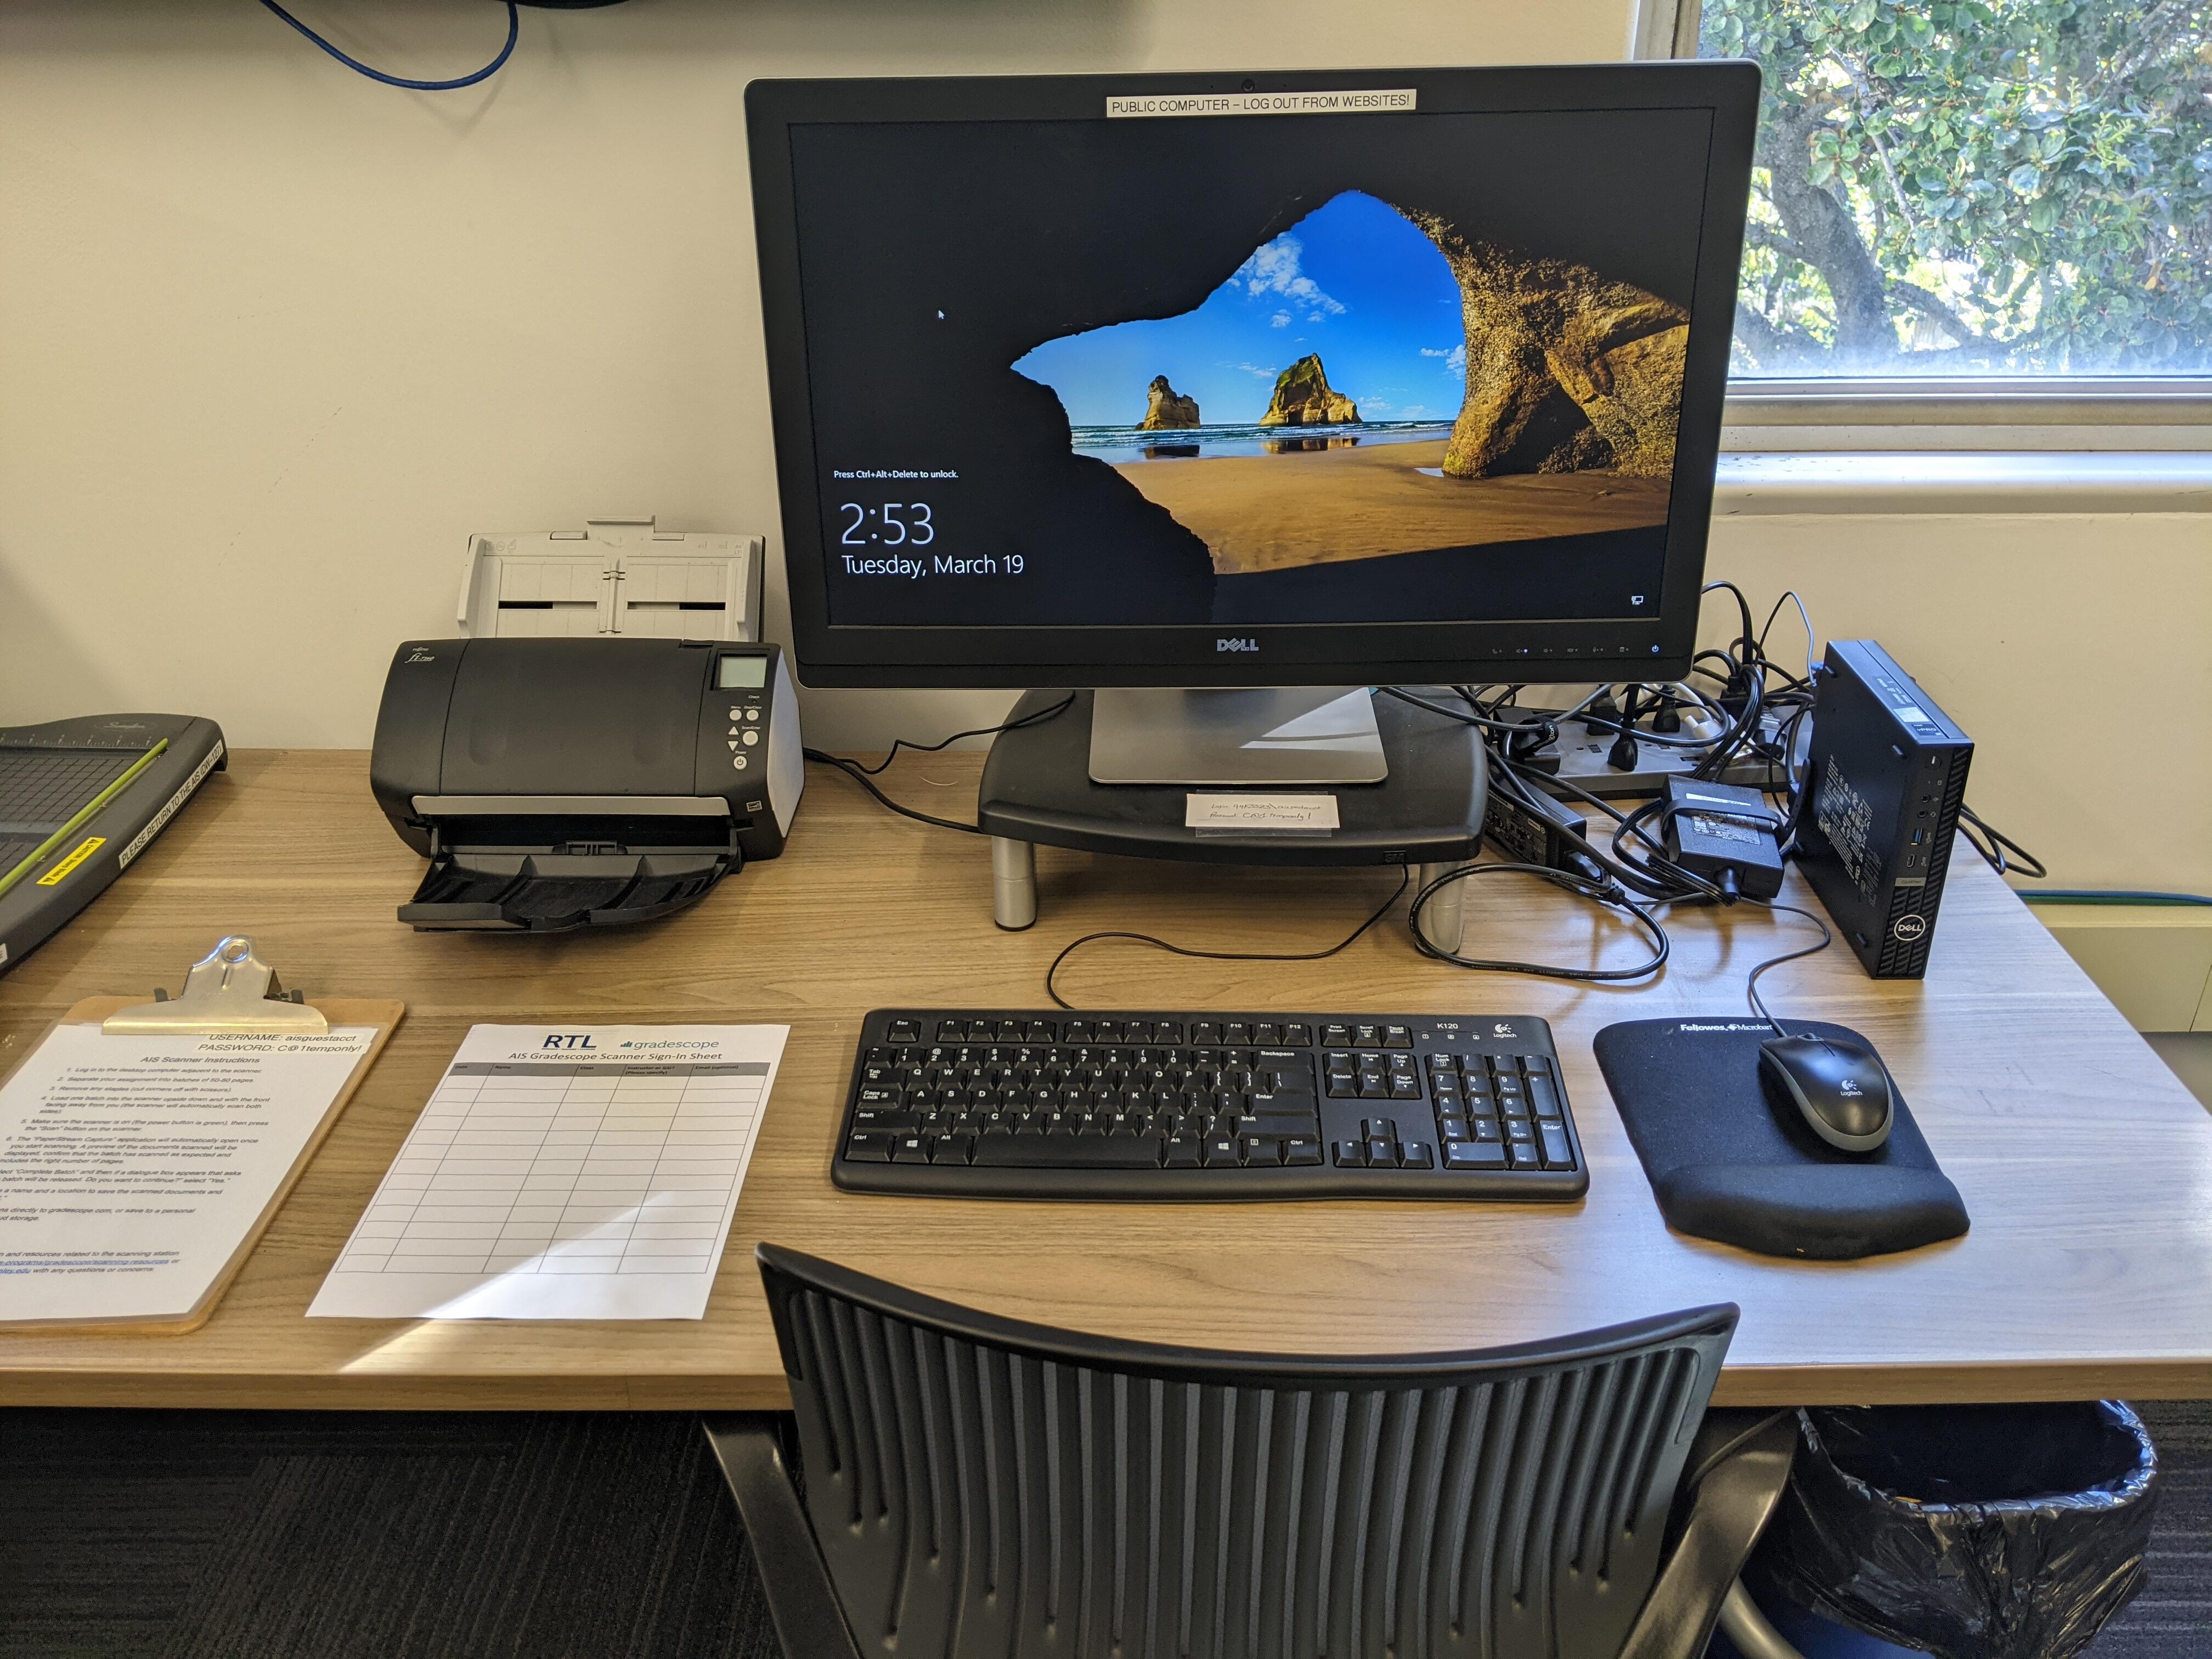 The document scanning station in the Academic Innovation Studio consisting of a desktop computer, keyboard, mouse, document scanner, and sign-in sheet on a desk with a desk chair.